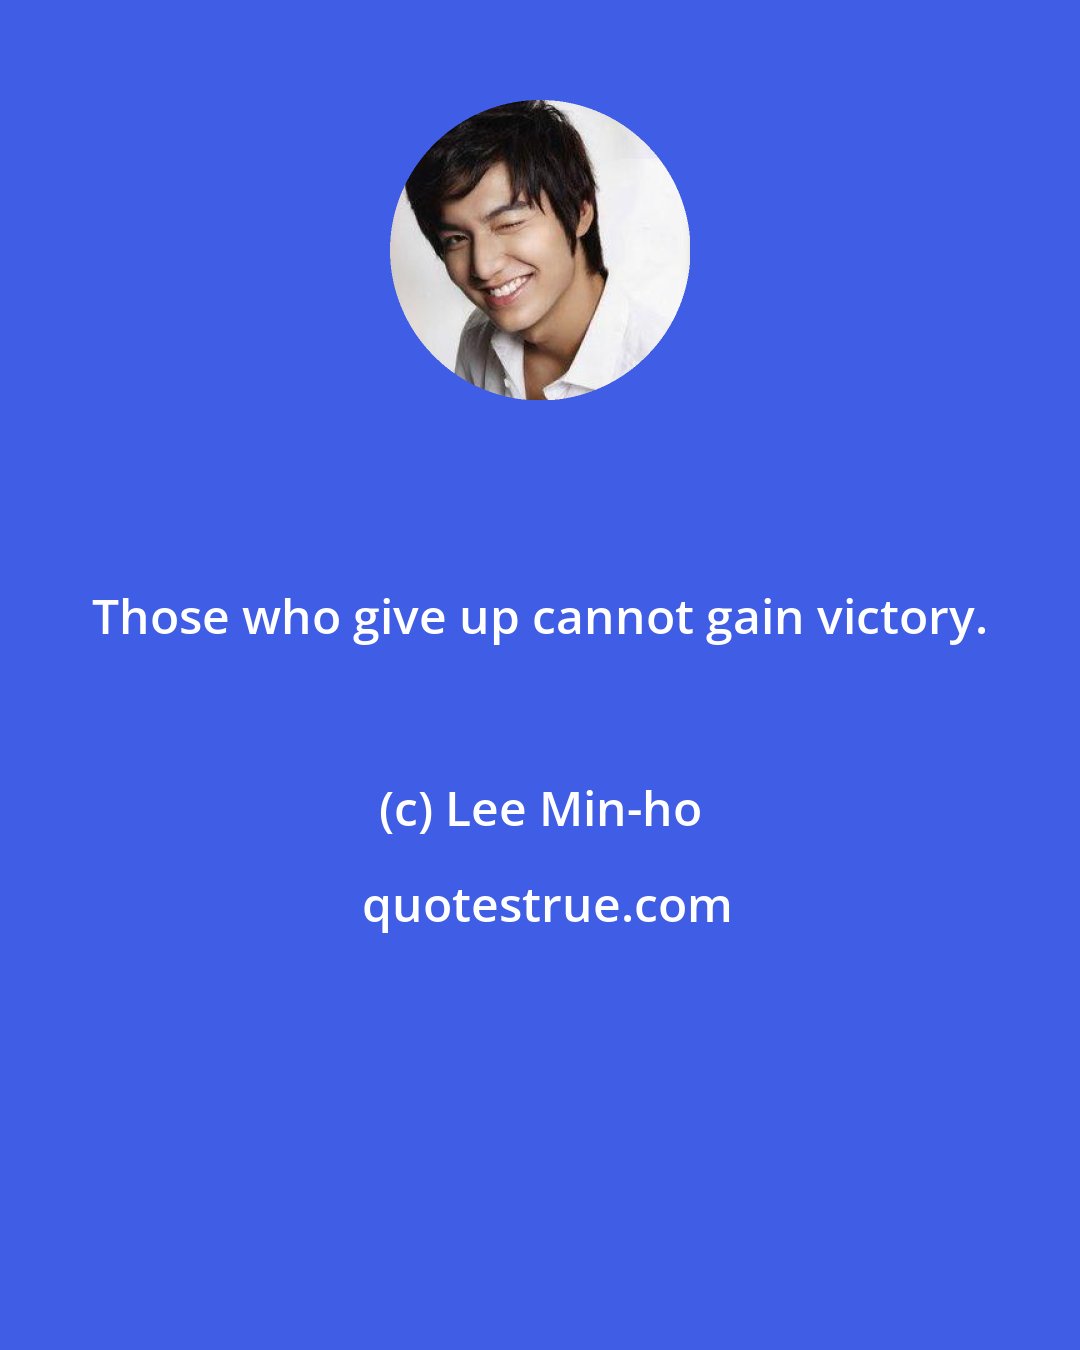 Lee Min-ho: Those who give up cannot gain victory.